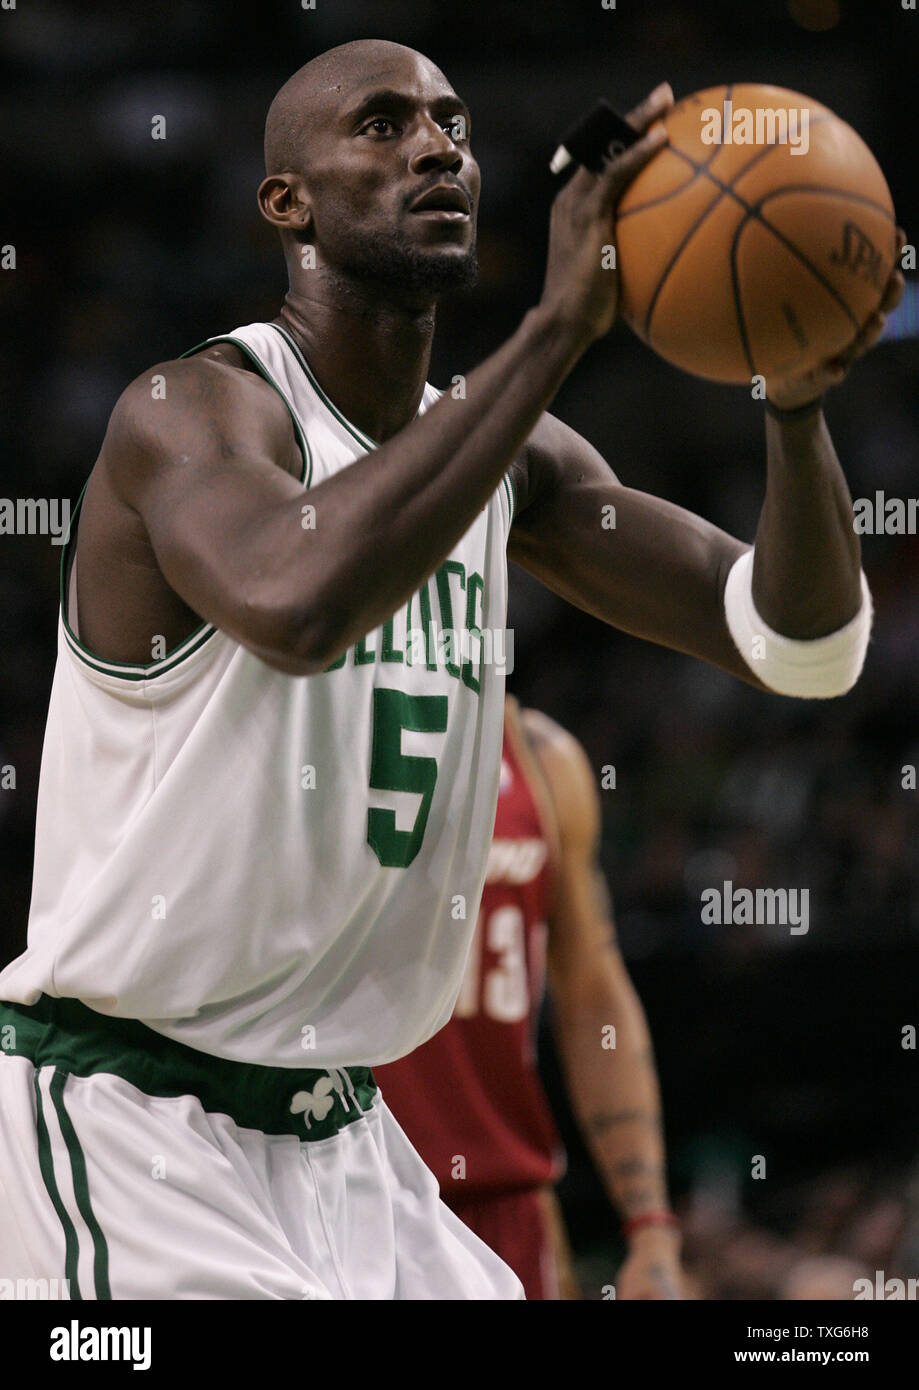 Boston Celtics forward Kevin Garnett (5) takes a free throw against the Cleveland Cavaliers in the second half at the TD Garden in Boston, Massachusetts on February 25, 2010.  The Cavaliers defeated the Celtics 108-88.   UPI/Matthew Healey Stock Photo